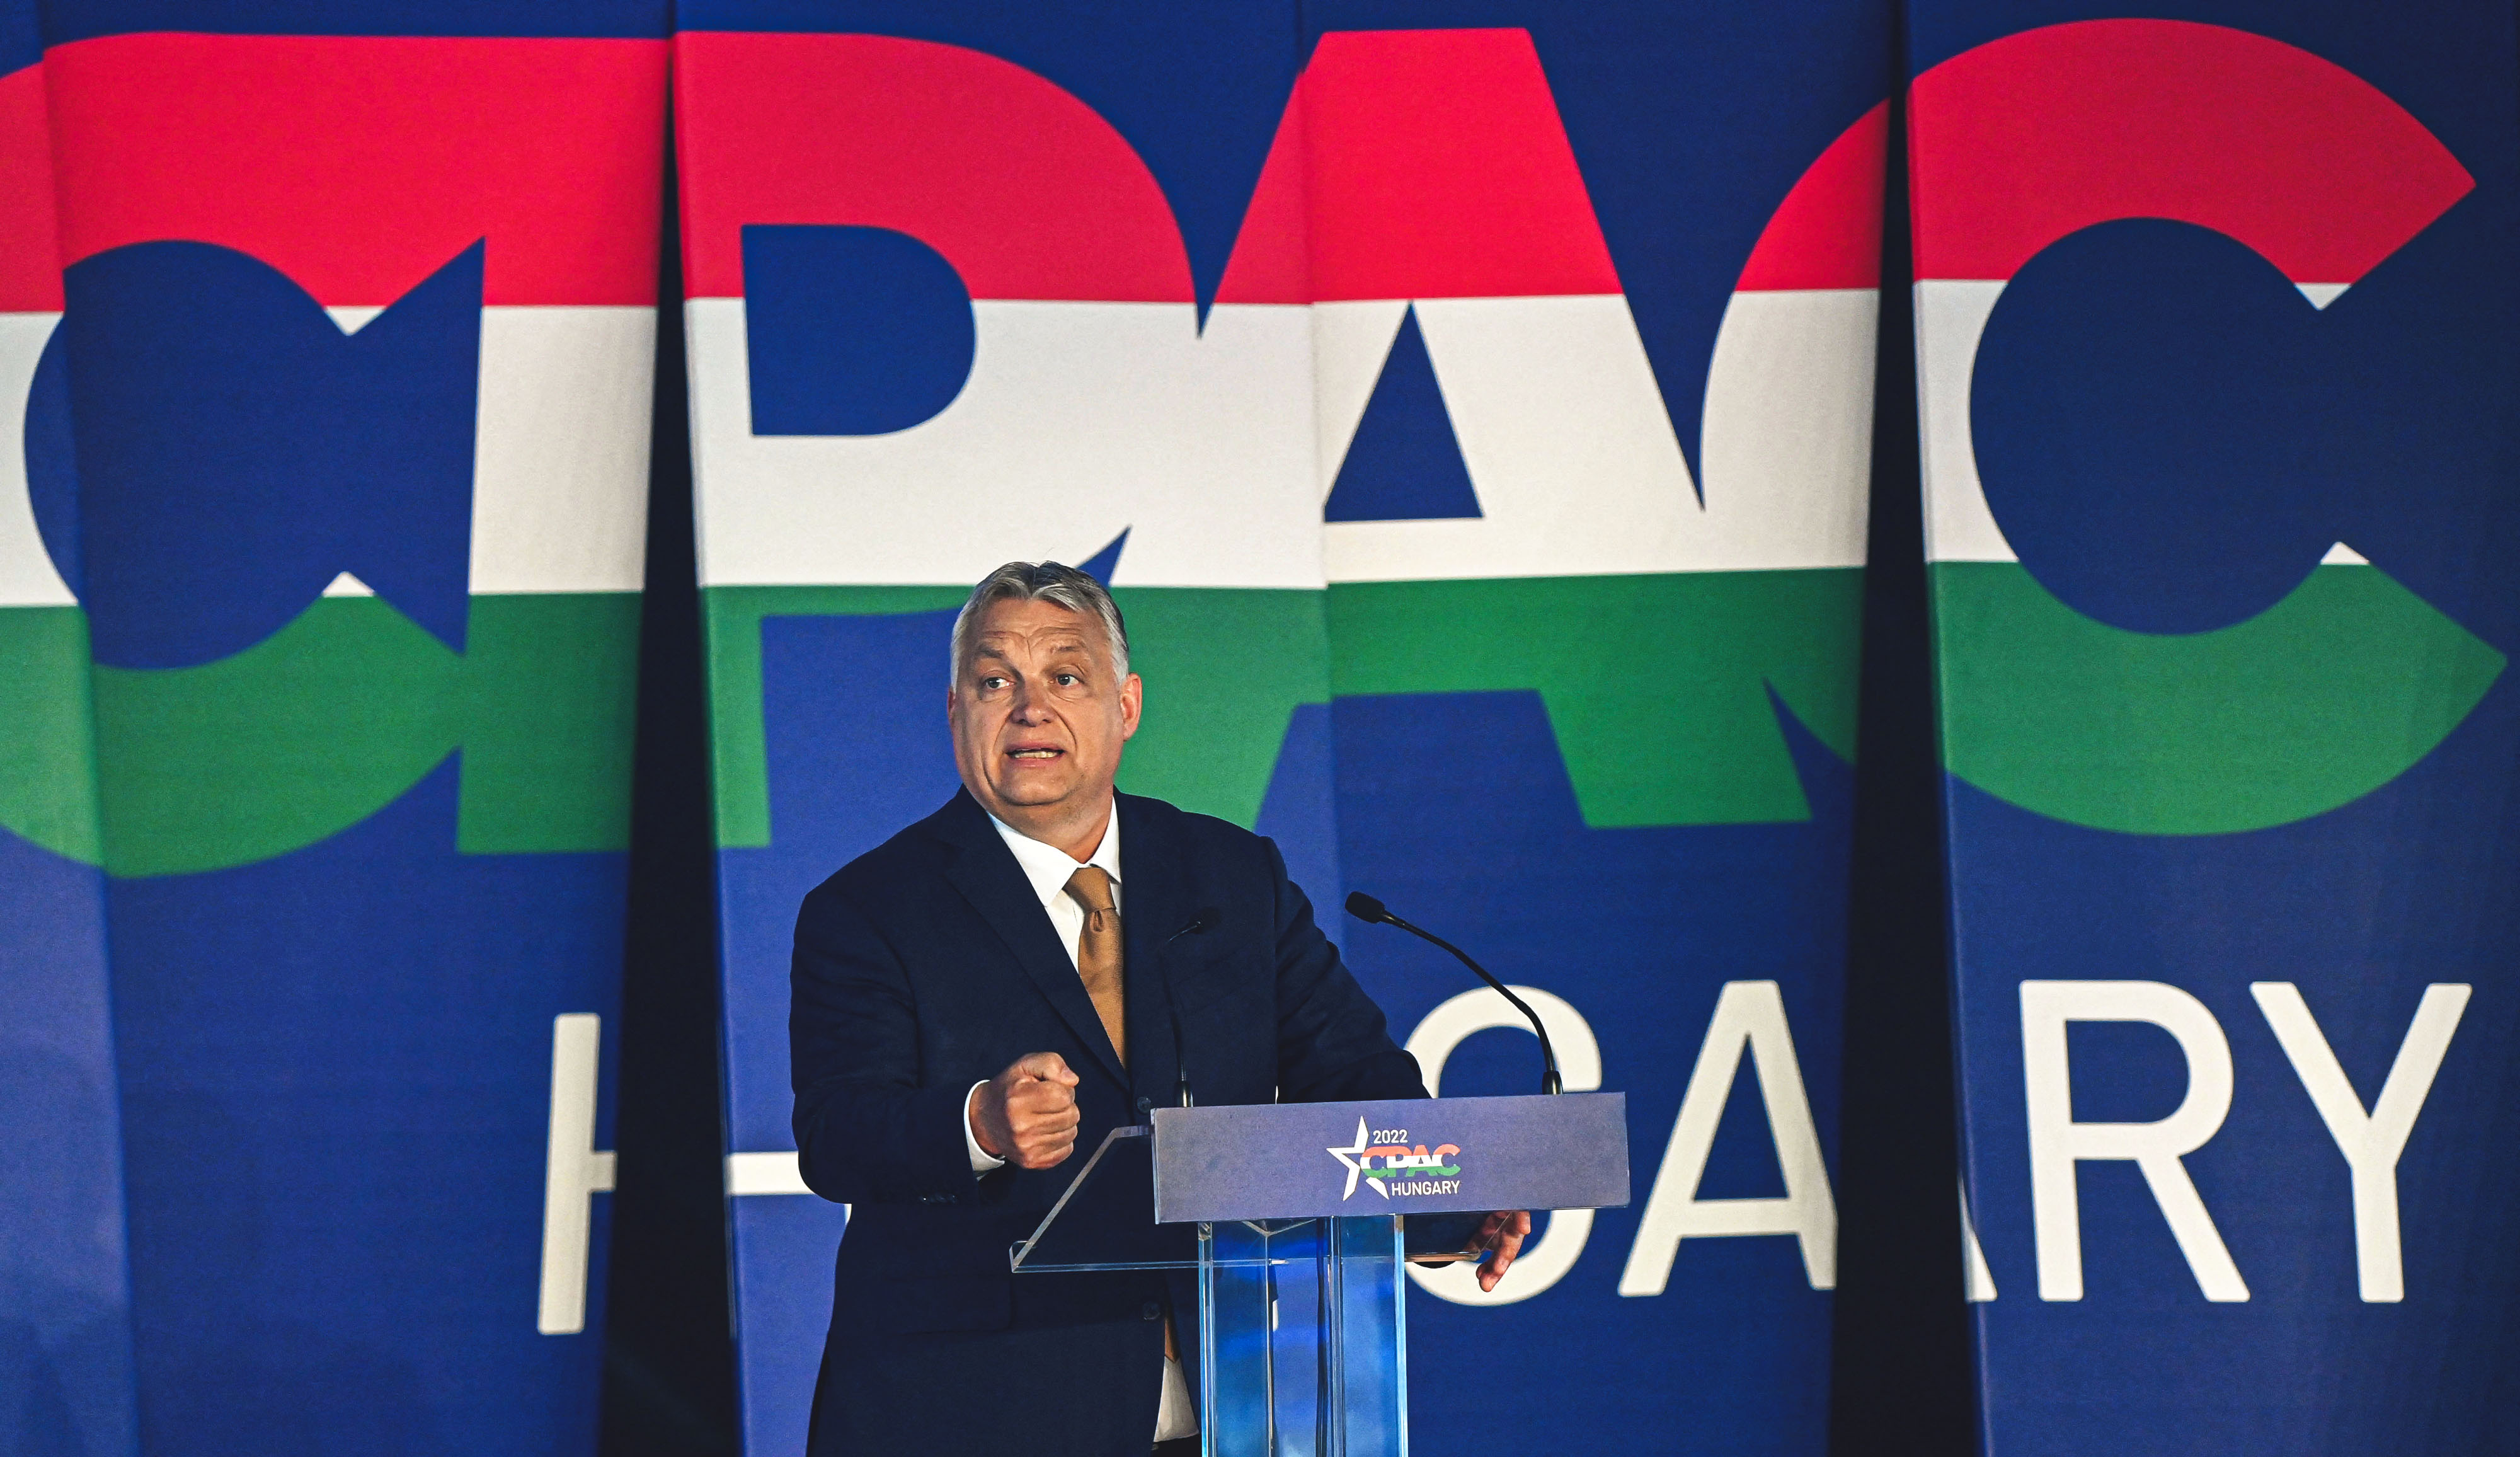 Hungary’s PM Viktor Orban announced to speak at CPAC